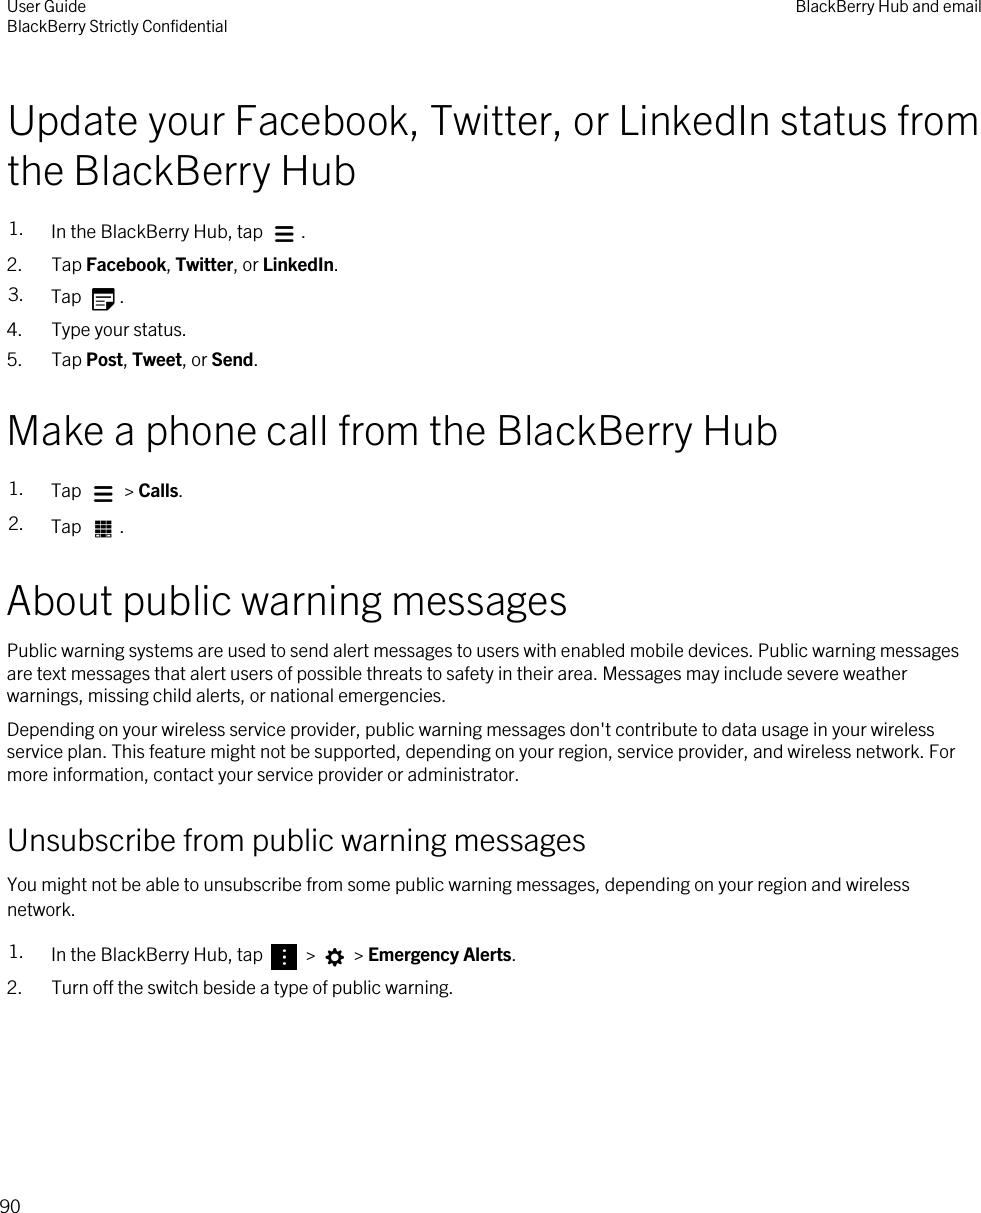 Update your Facebook, Twitter, or LinkedIn status from the BlackBerry Hub1. In the BlackBerry Hub, tap  .2. Tap Facebook, Twitter, or LinkedIn.3. Tap  .4. Type your status.5. Tap Post, Tweet, or Send.Make a phone call from the BlackBerry Hub1. Tap   &gt; Calls.2. Tap  .About public warning messagesPublic warning systems are used to send alert messages to users with enabled mobile devices. Public warning messages are text messages that alert users of possible threats to safety in their area. Messages may include severe weather warnings, missing child alerts, or national emergencies.Depending on your wireless service provider, public warning messages don&apos;t contribute to data usage in your wireless service plan. This feature might not be supported, depending on your region, service provider, and wireless network. For more information, contact your service provider or administrator.Unsubscribe from public warning messagesYou might not be able to unsubscribe from some public warning messages, depending on your region and wireless network.1. In the BlackBerry Hub, tap   &gt;   &gt; Emergency Alerts.2. Turn off the switch beside a type of public warning.User GuideBlackBerry Strictly Confidential BlackBerry Hub and email90